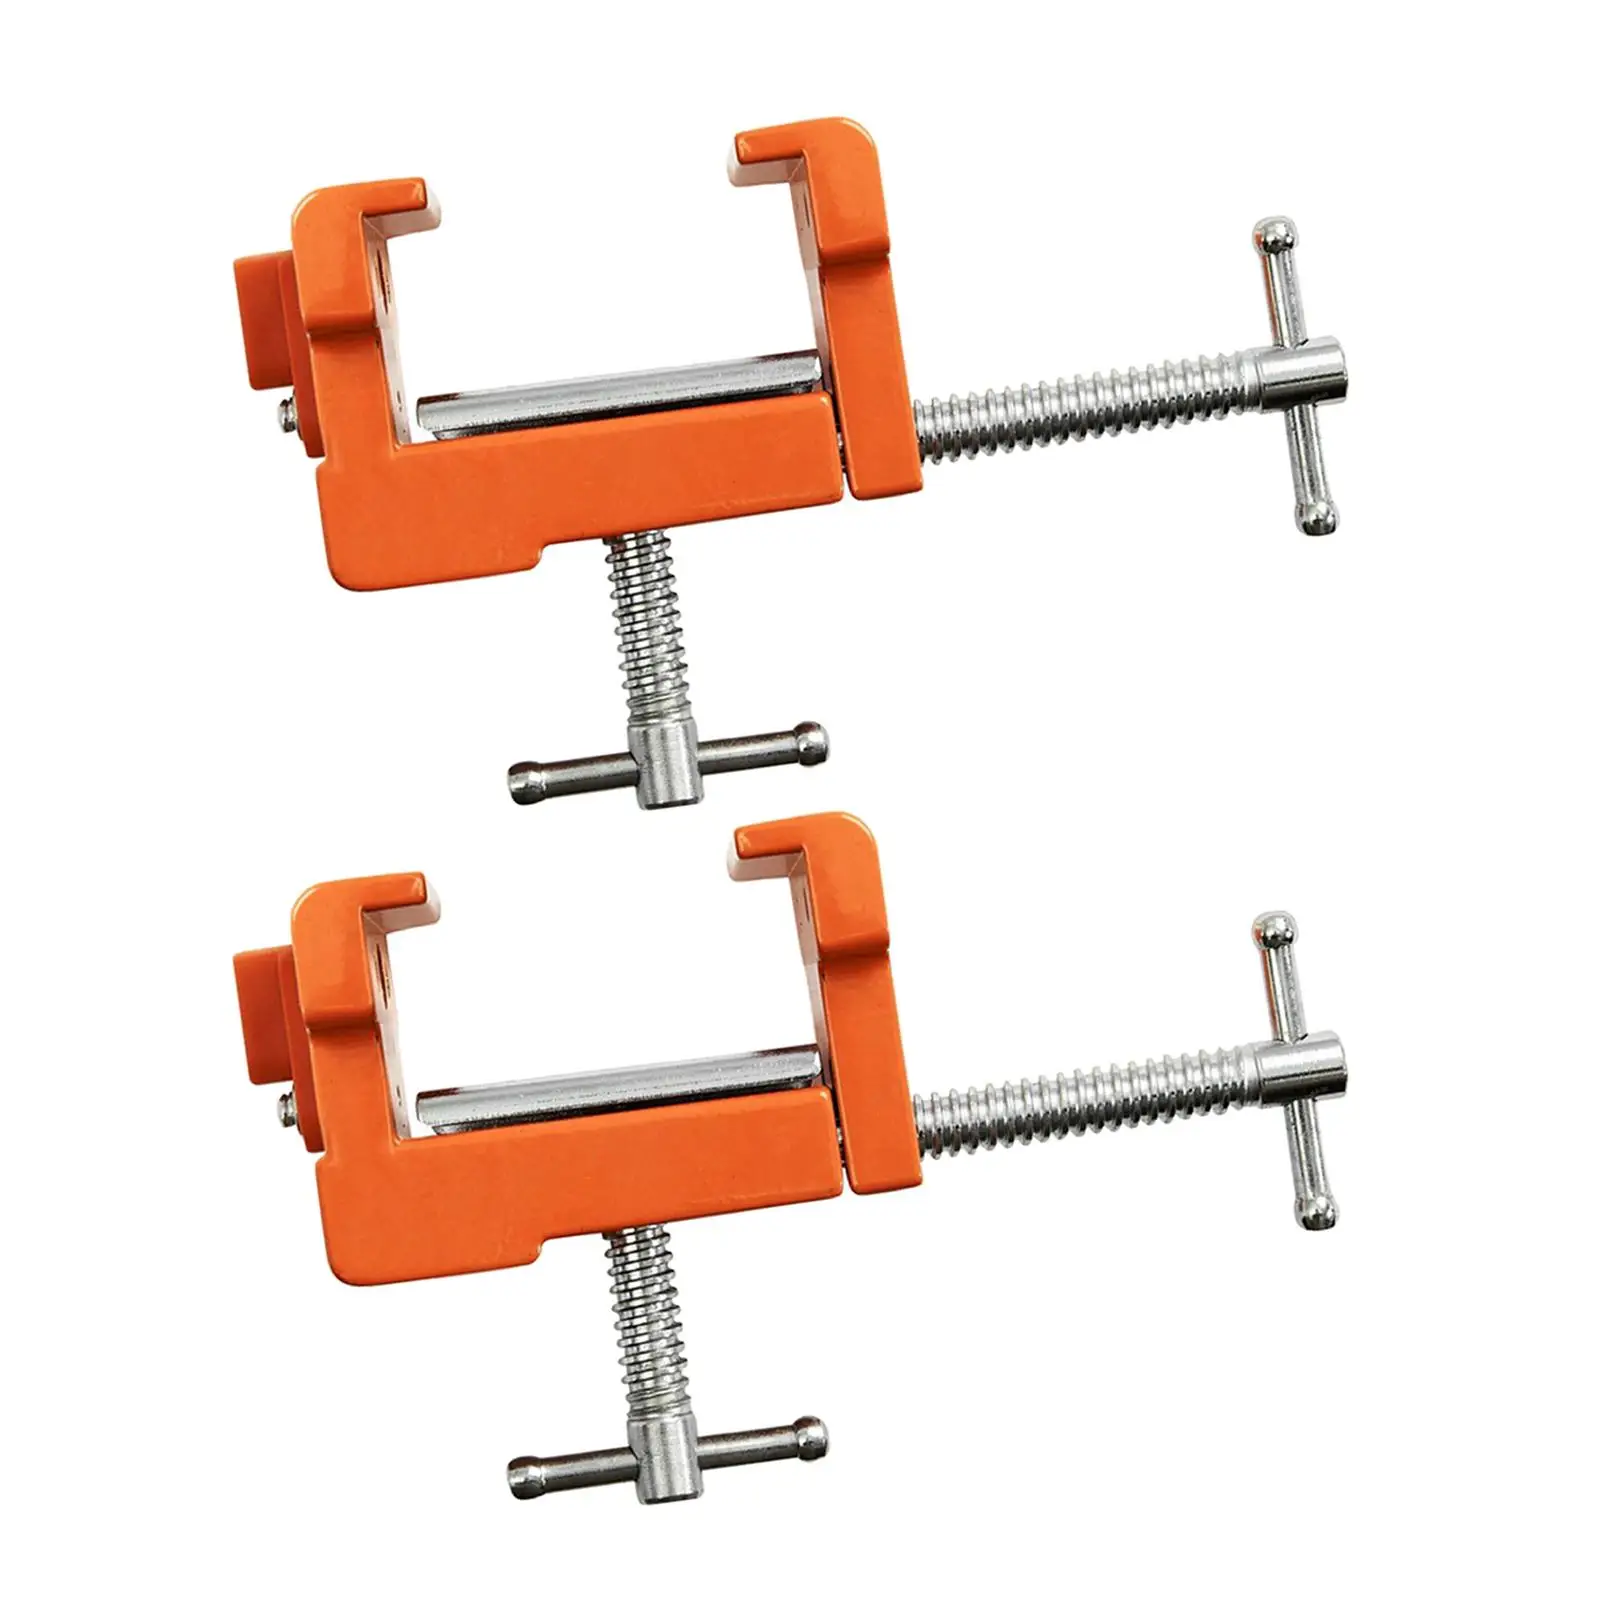 2Pcs Cabinetry Clamps Mounting Craft Repair Professional Woodworking Metal